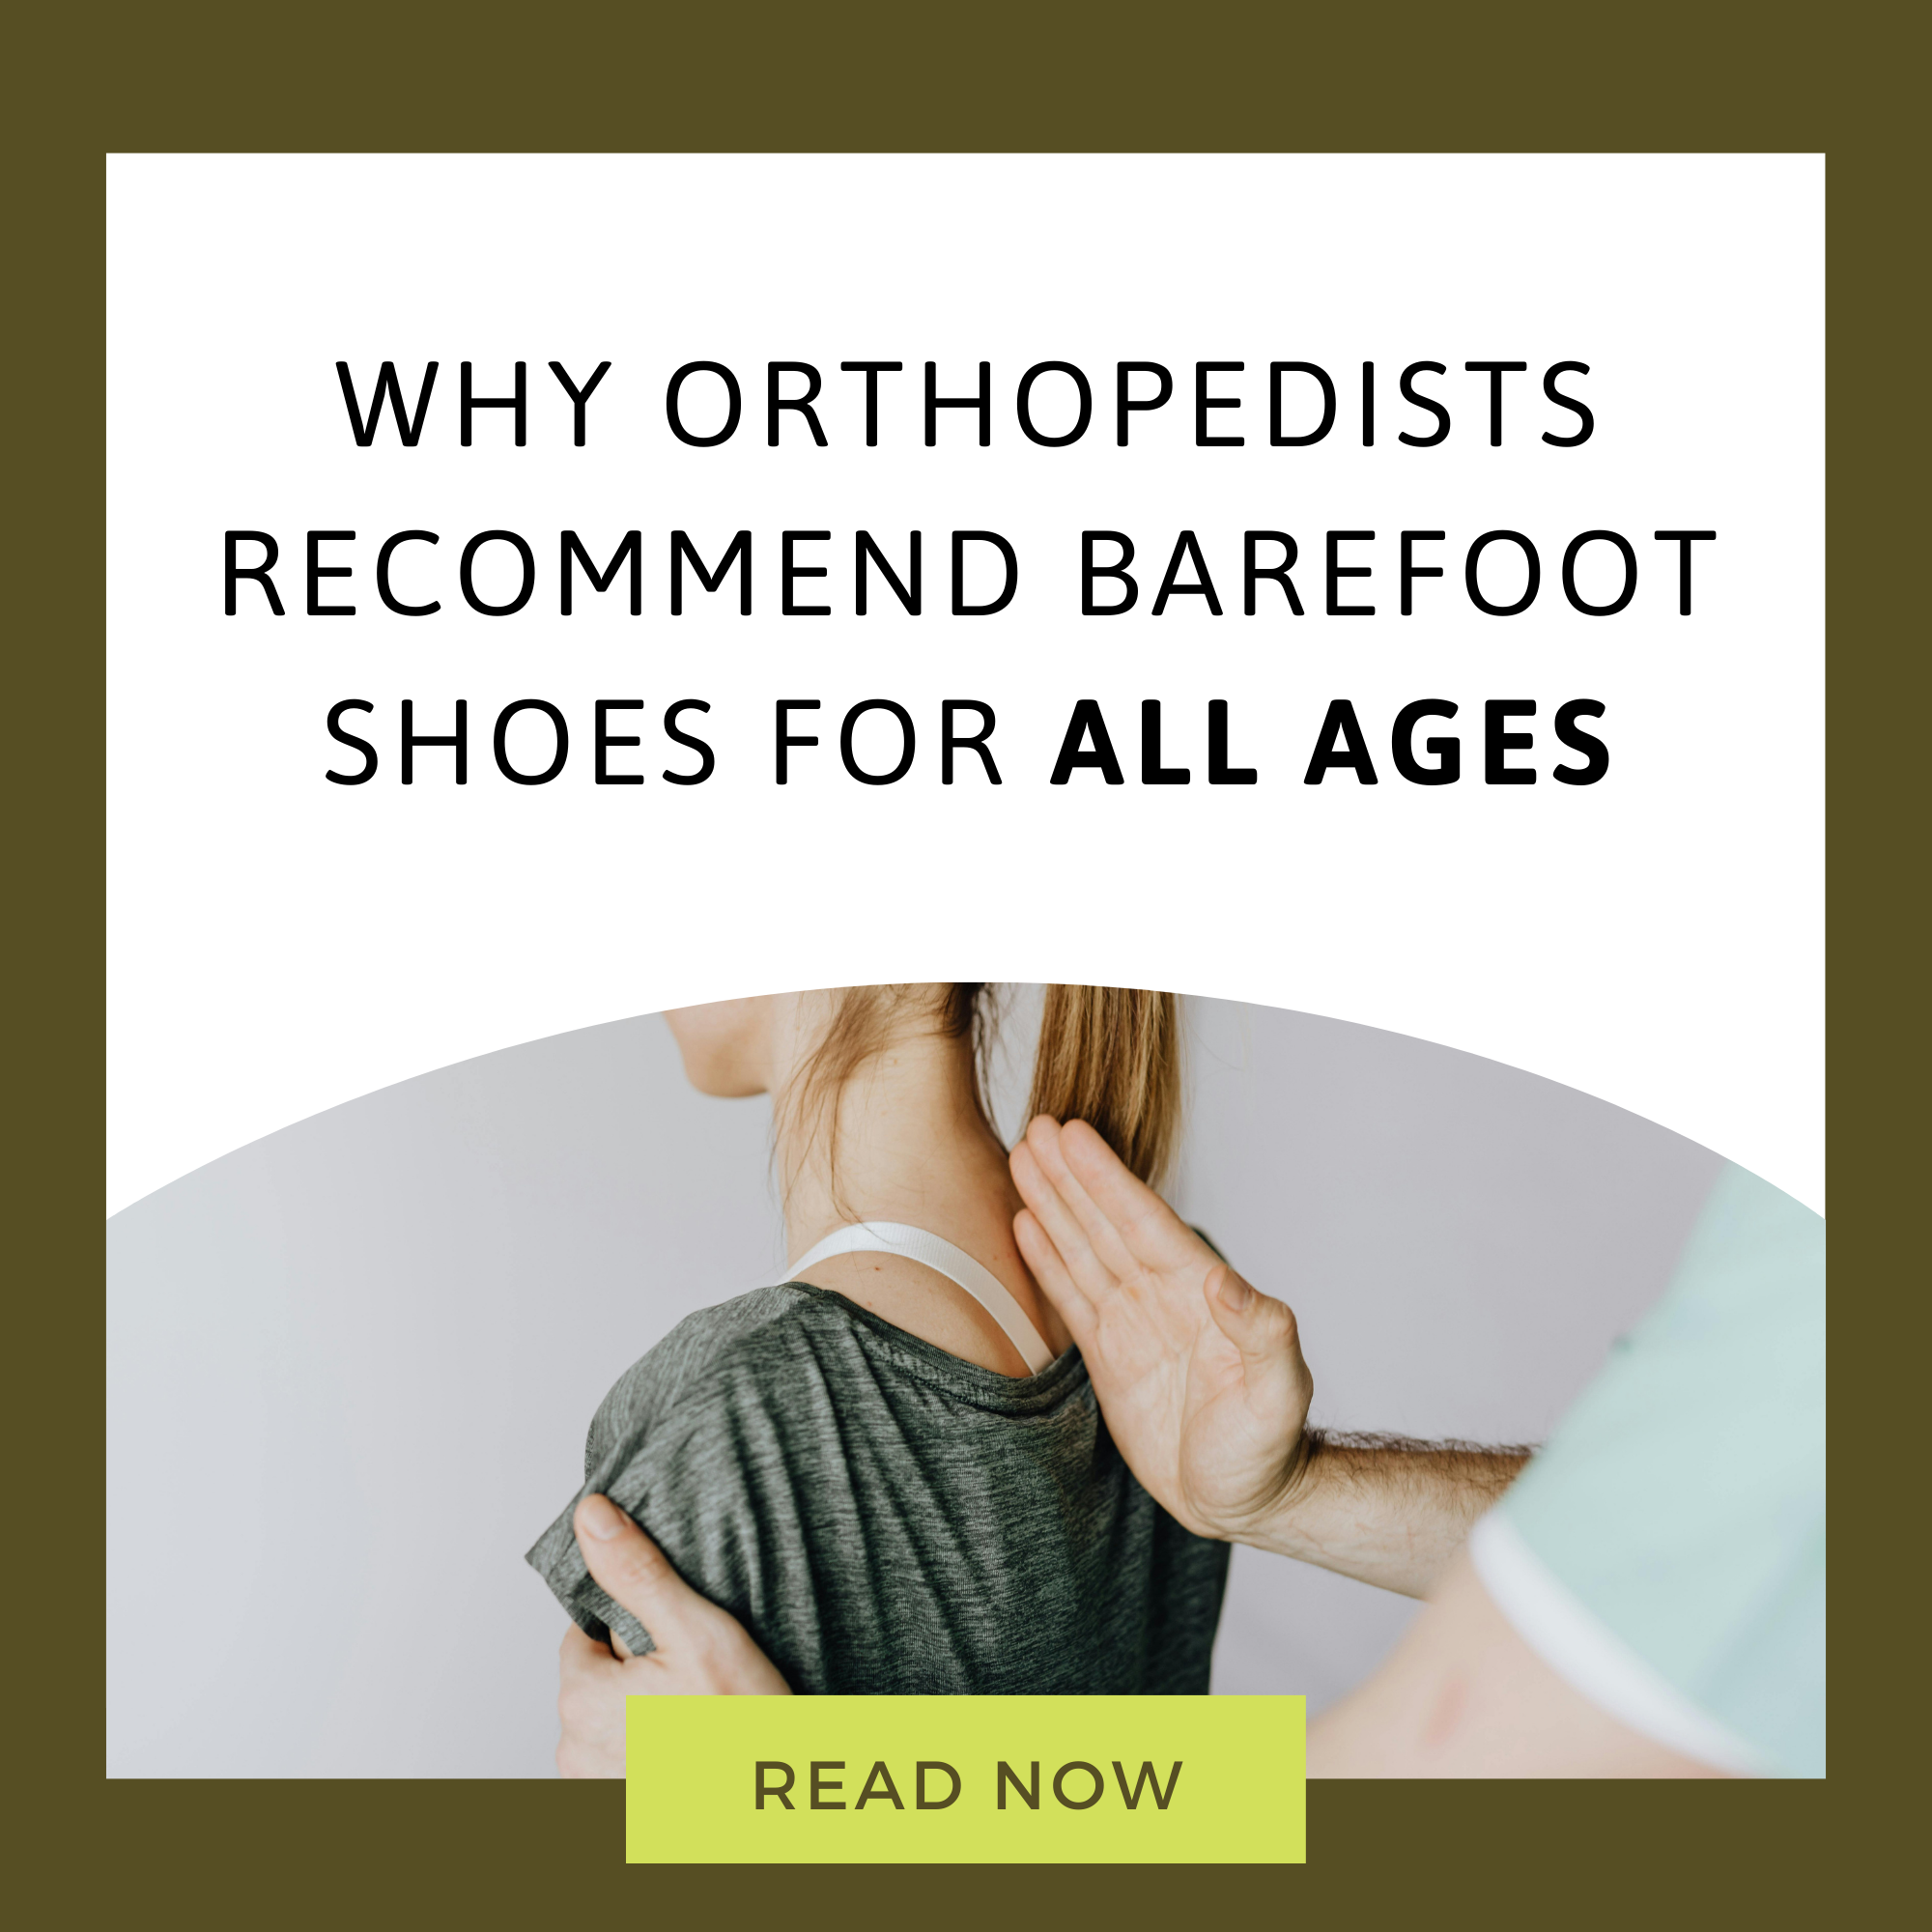 Why Orthopedists Recommend Barefoot Shoes for All Ages